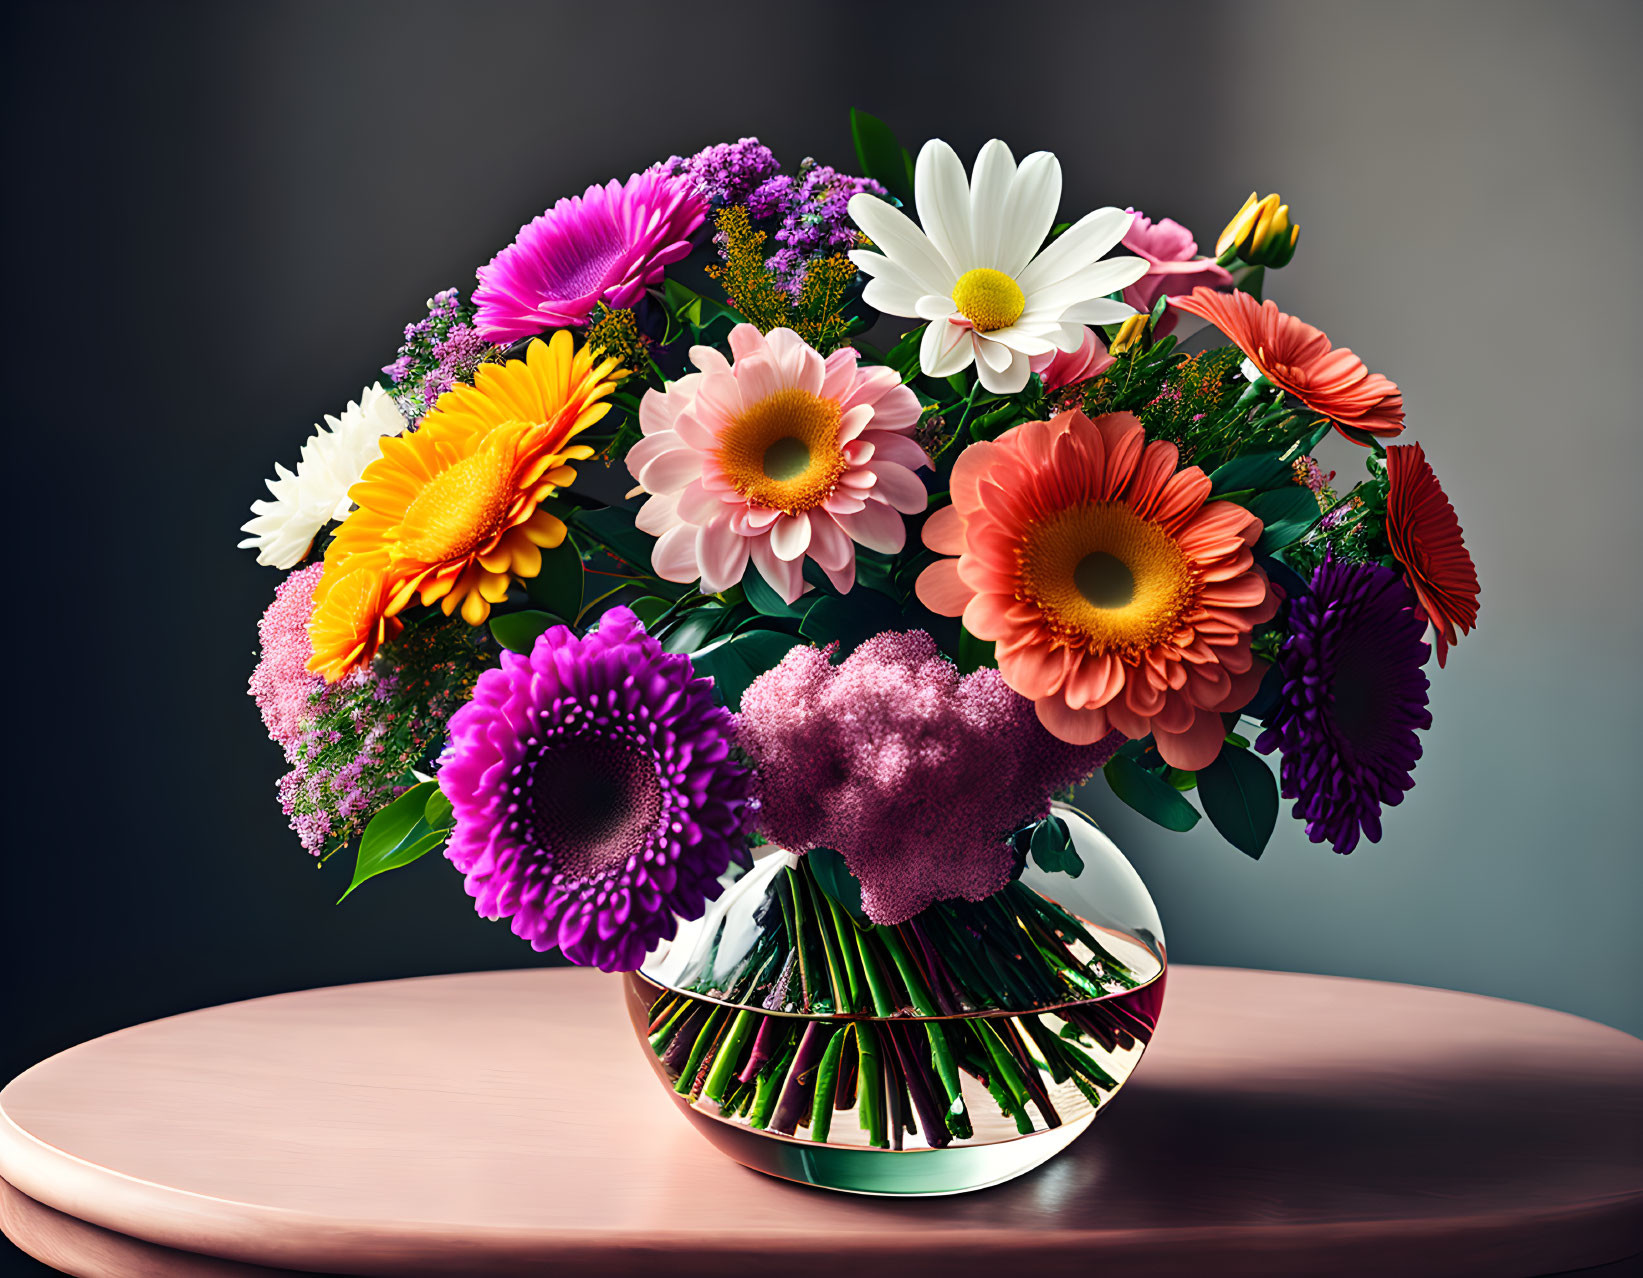 Colorful Flower Bouquet in Glass Vase on Wooden Surface